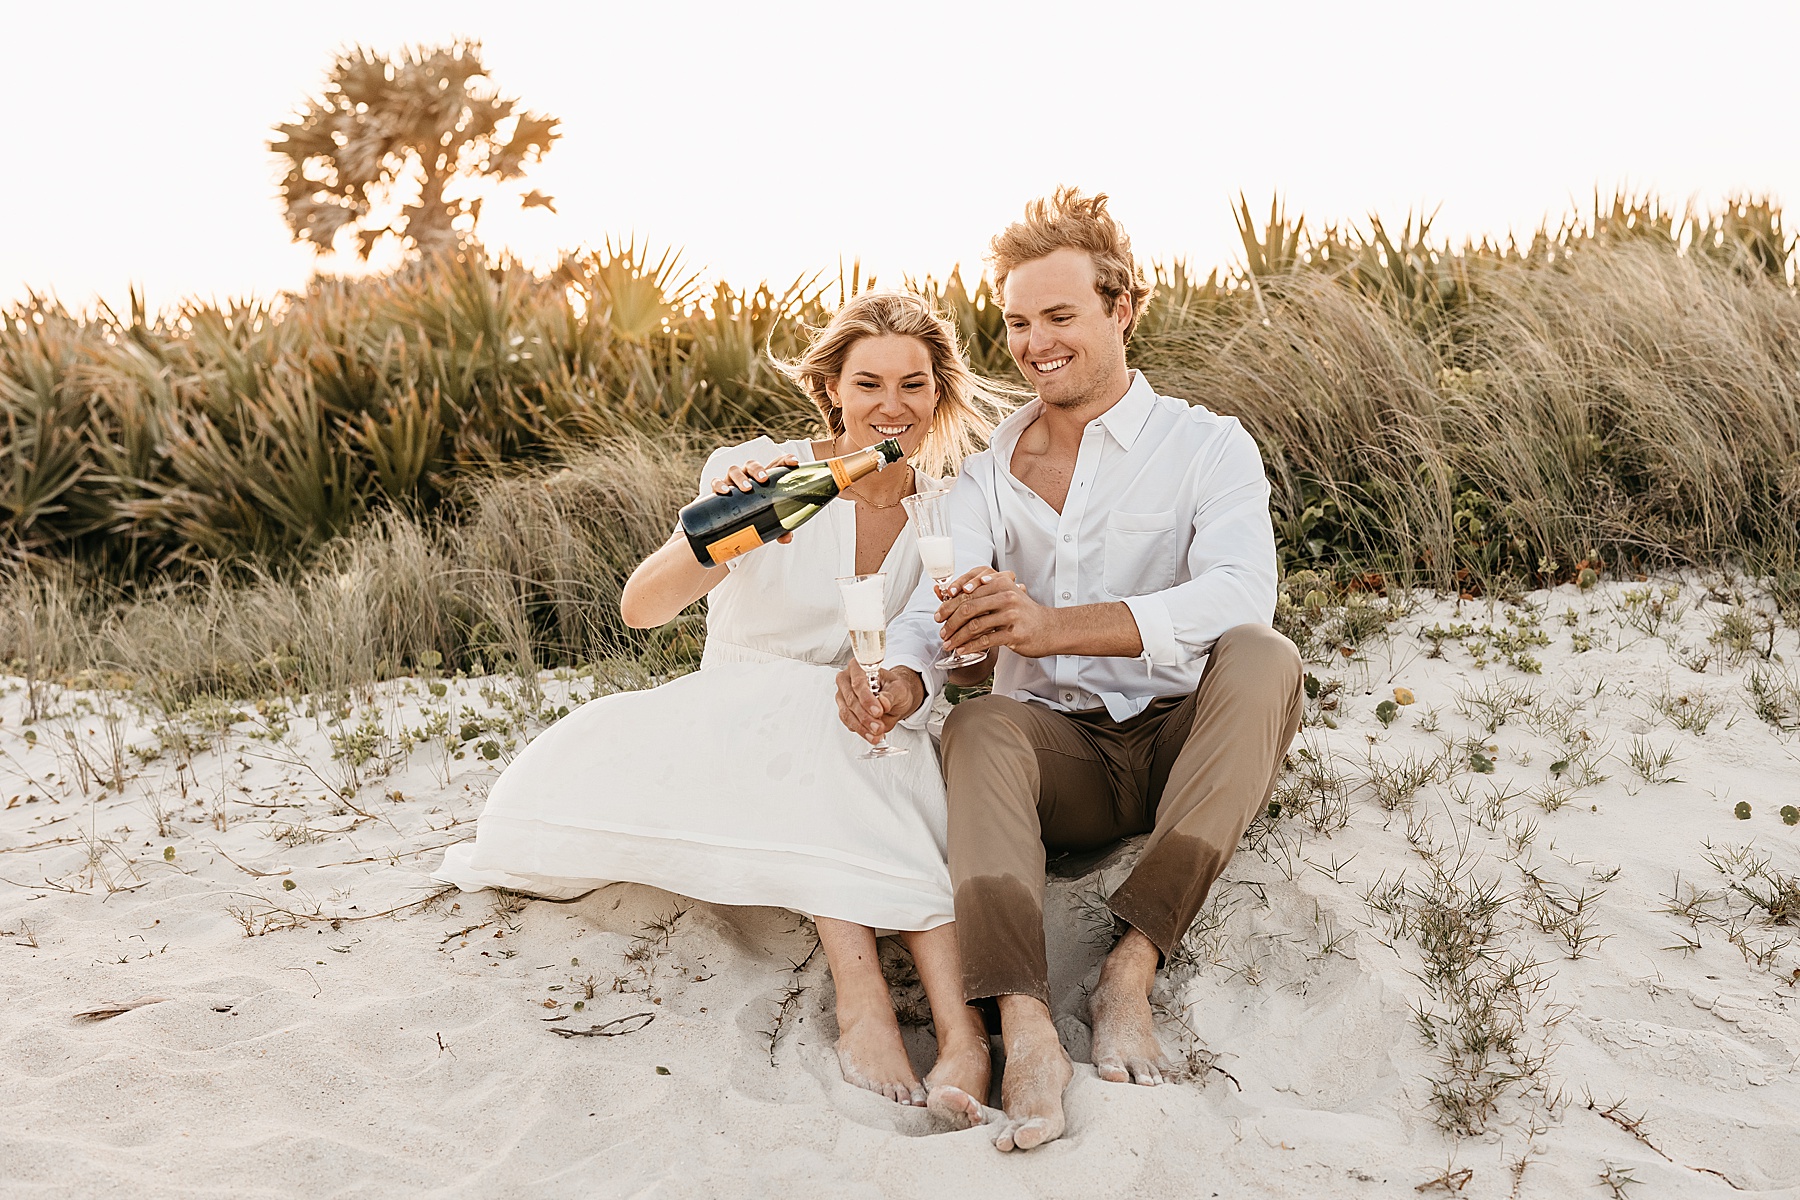 man and woman toasting champagne on the beach at sunset in neutral clothing